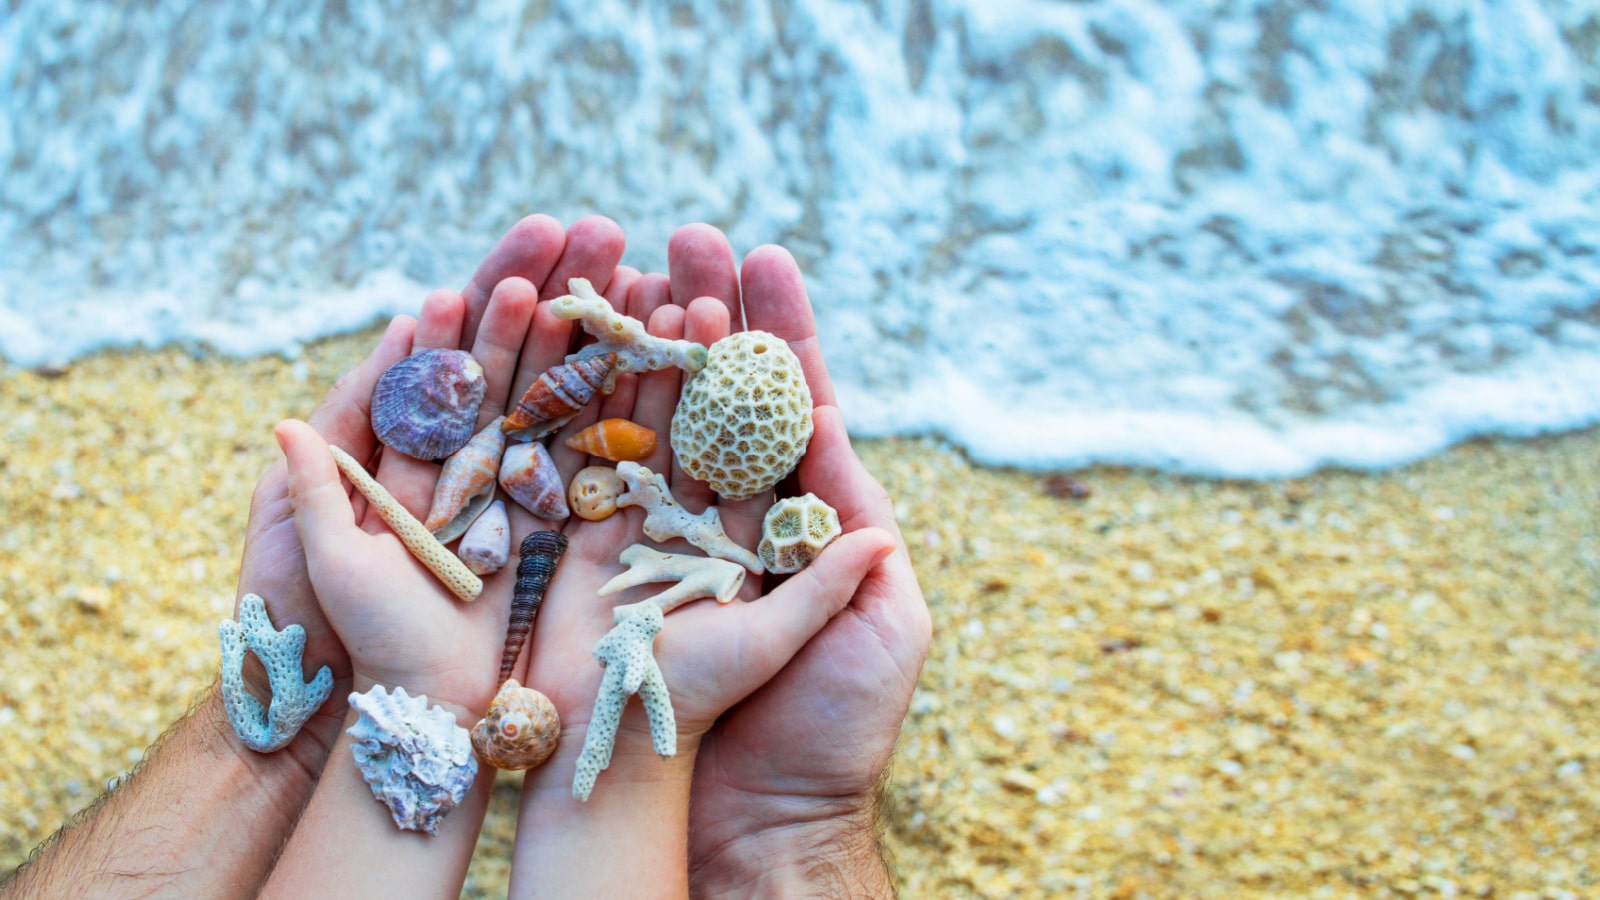 Hands holding sea shells, seashells in the hands of a child and dad against the background of the sea, family on vacation